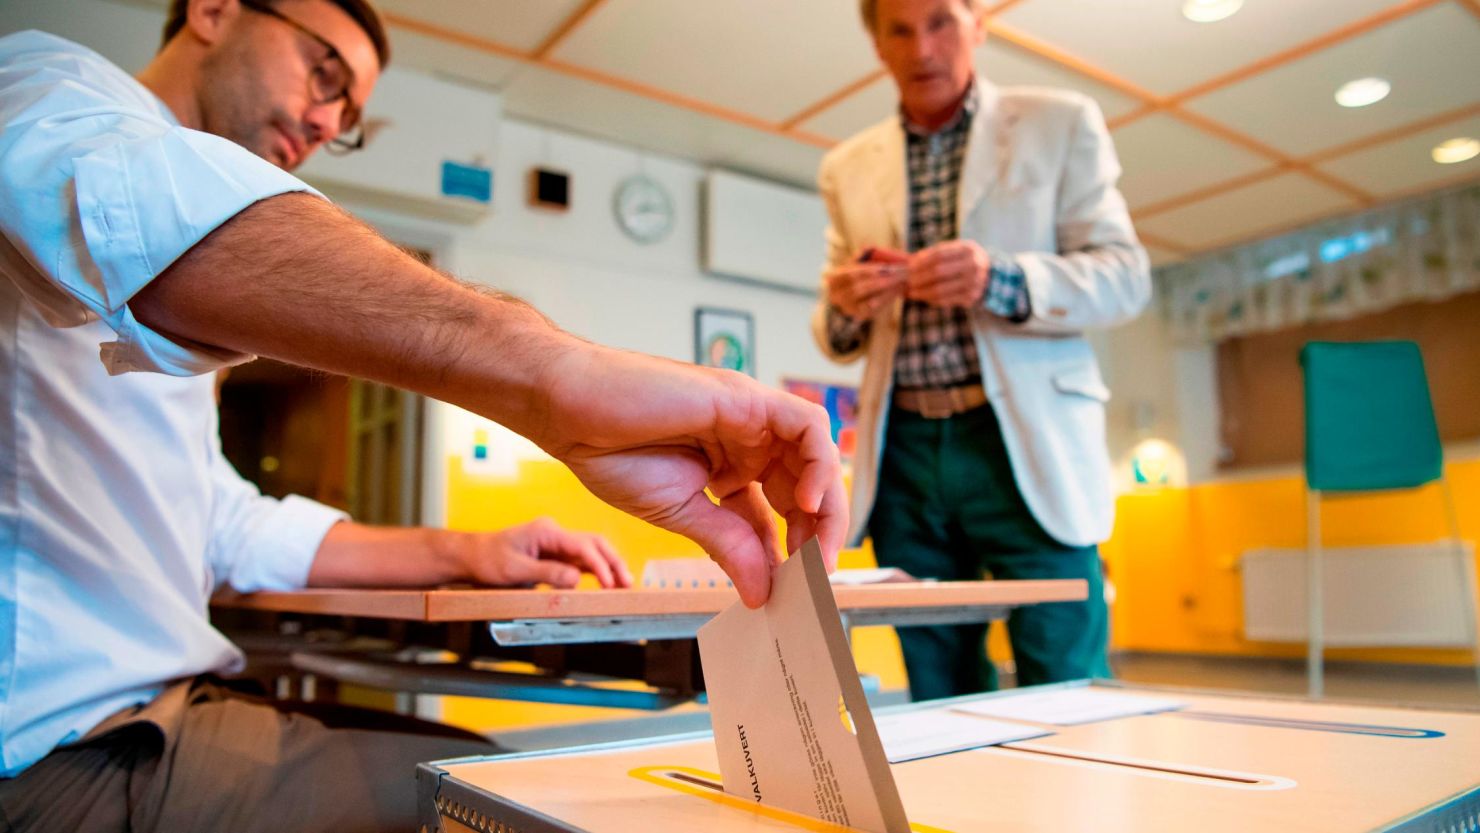 An election official casts a voter's ballot at a polling station in Stockholm on Sunday.